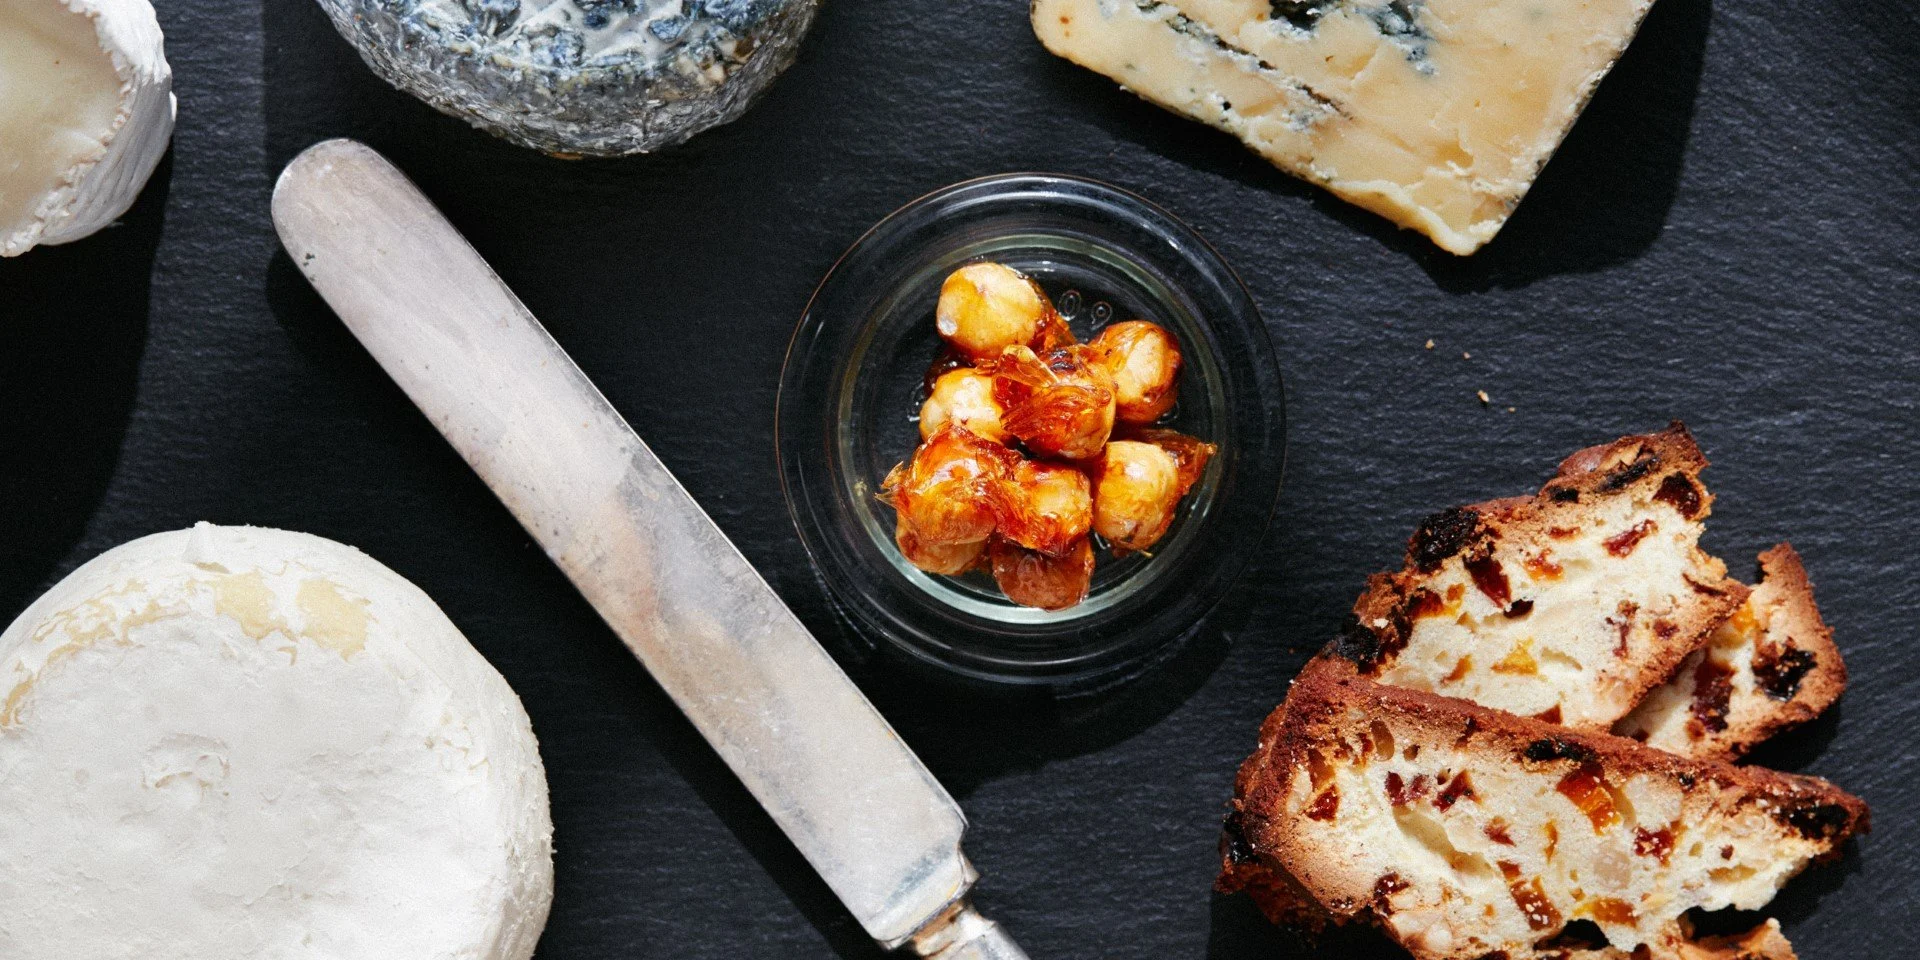 Cheese, caramelized hazelnuts, fruit and nut bread